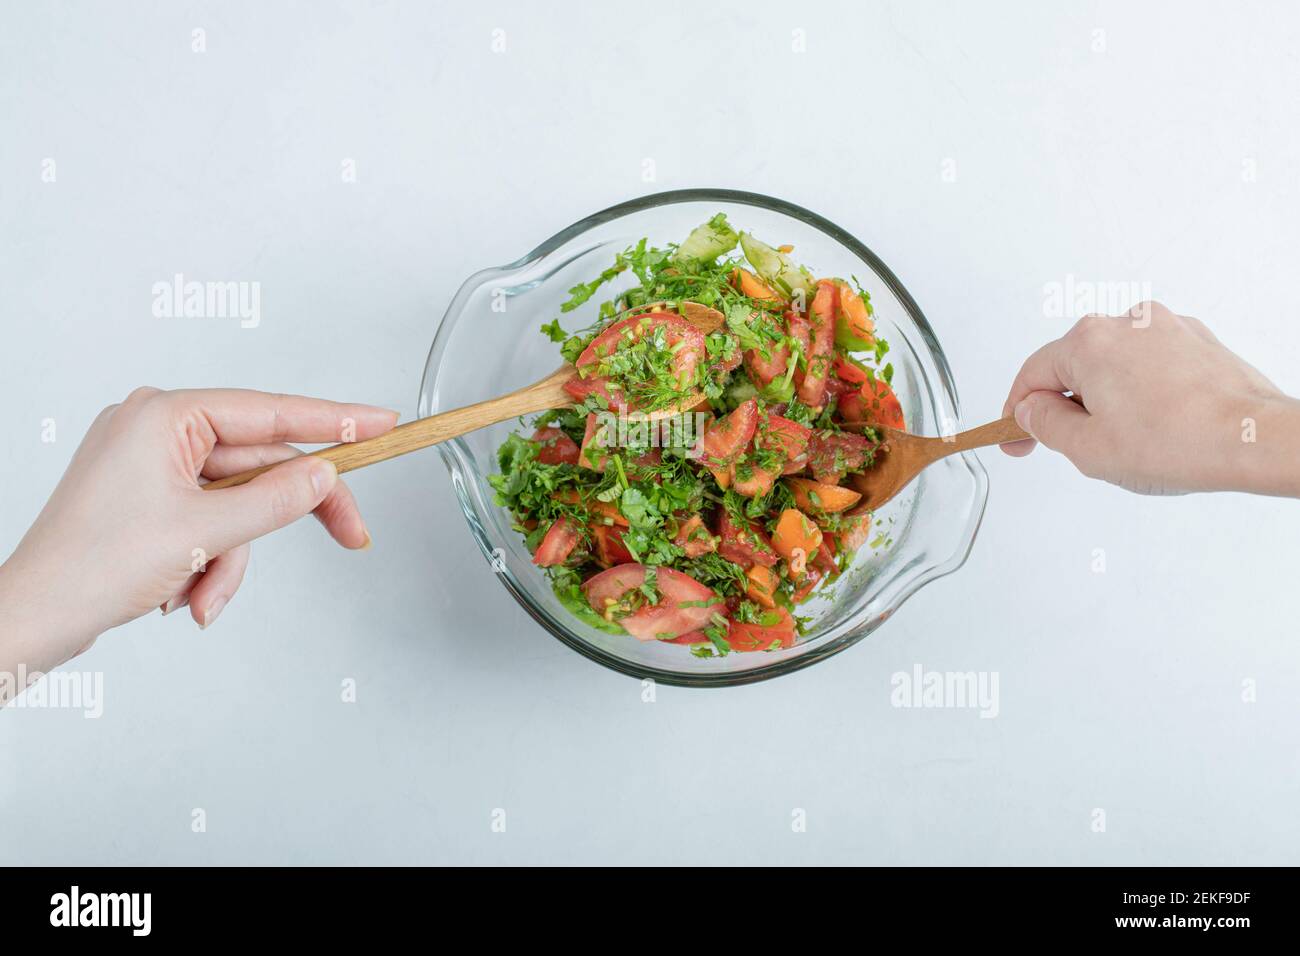 A glass plate of delicious vegetable salad Stock Photo